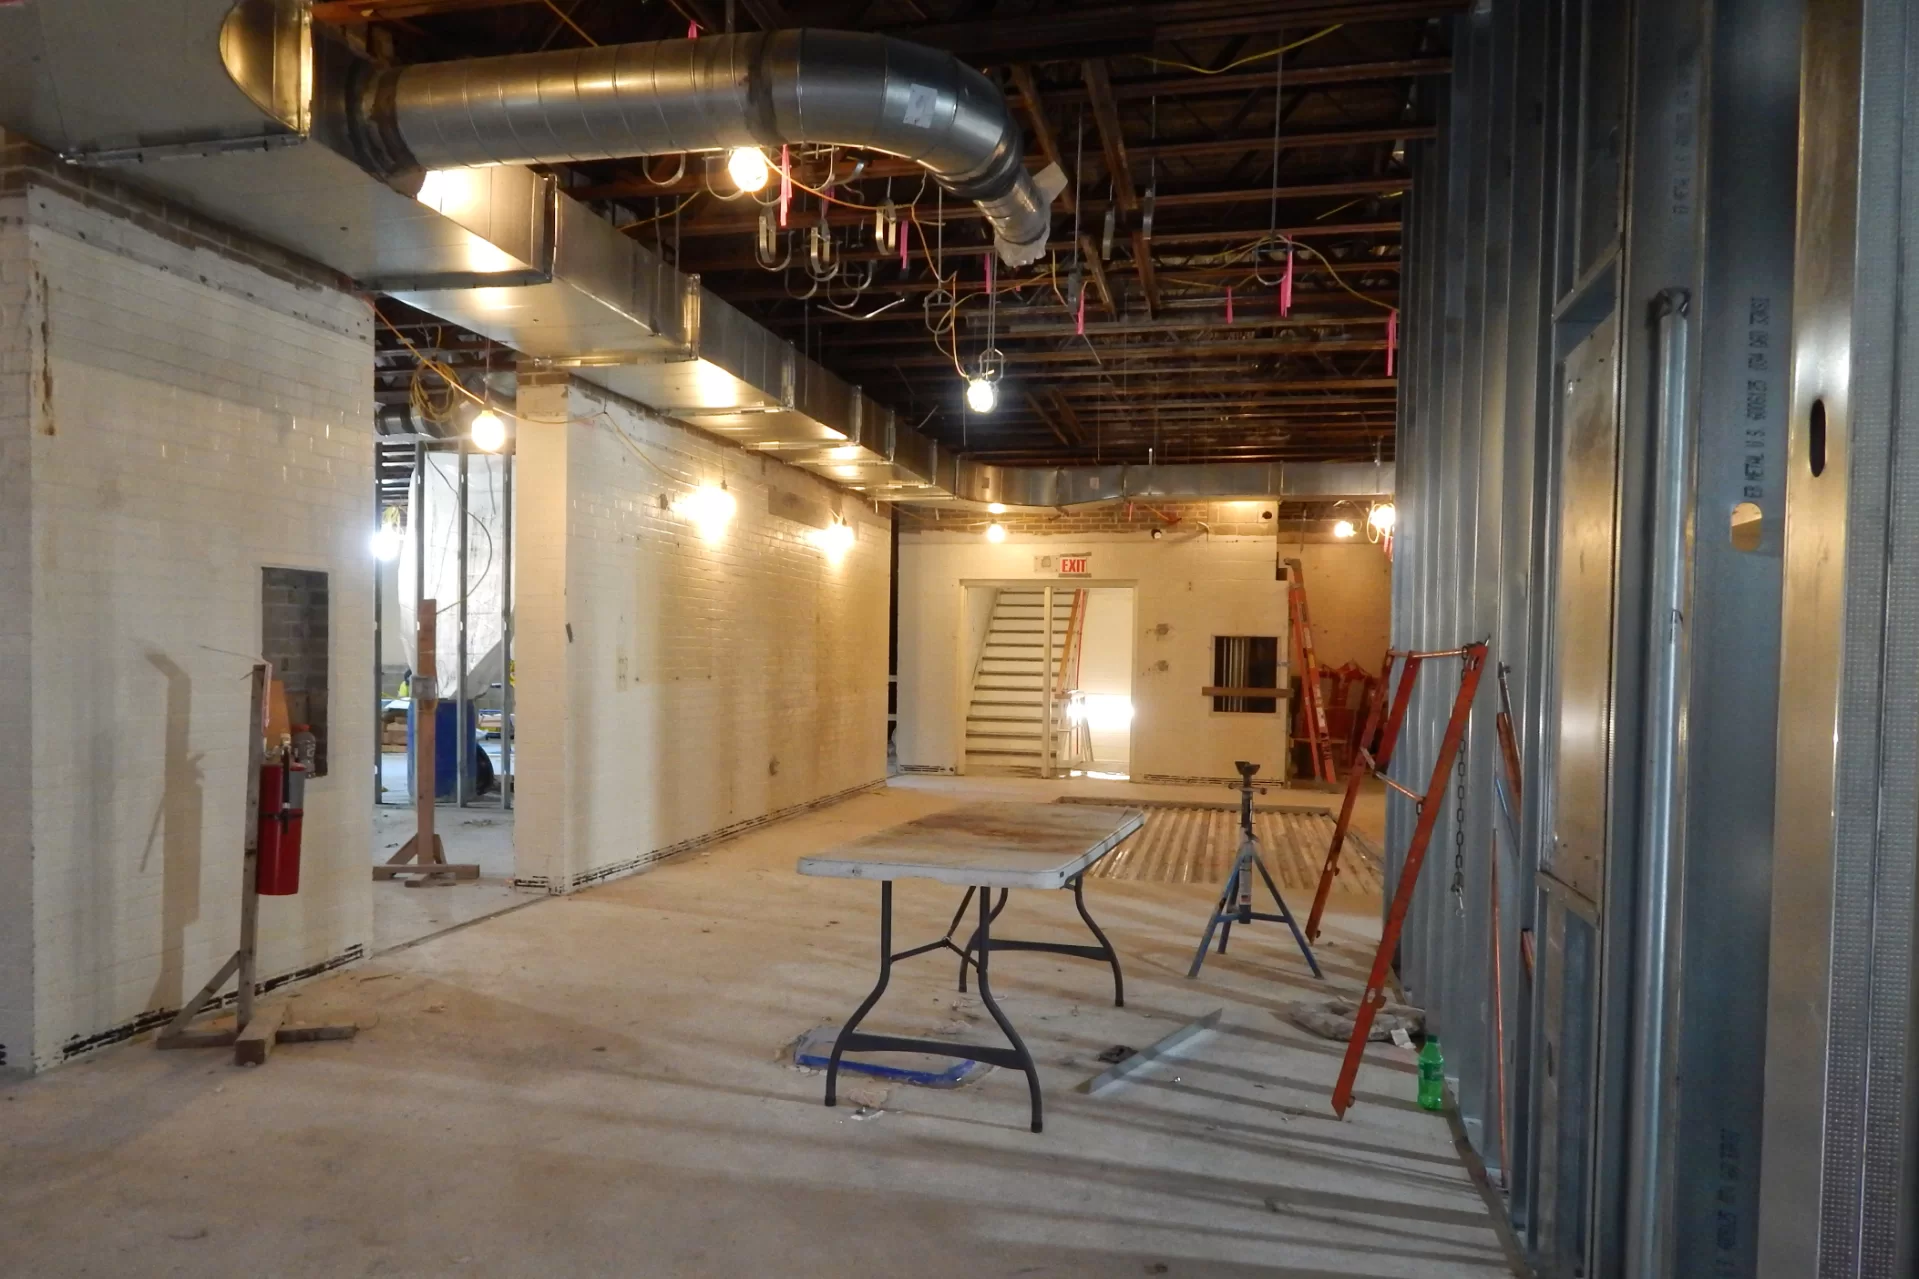 Dana Hall’s main entrance lobby. Note the steel decking right of center — the former site of restrooms, the steel will be infilled with concrete. The new restrooms are under construction out of the frame to the right. (Doug Hubley/Bates College)